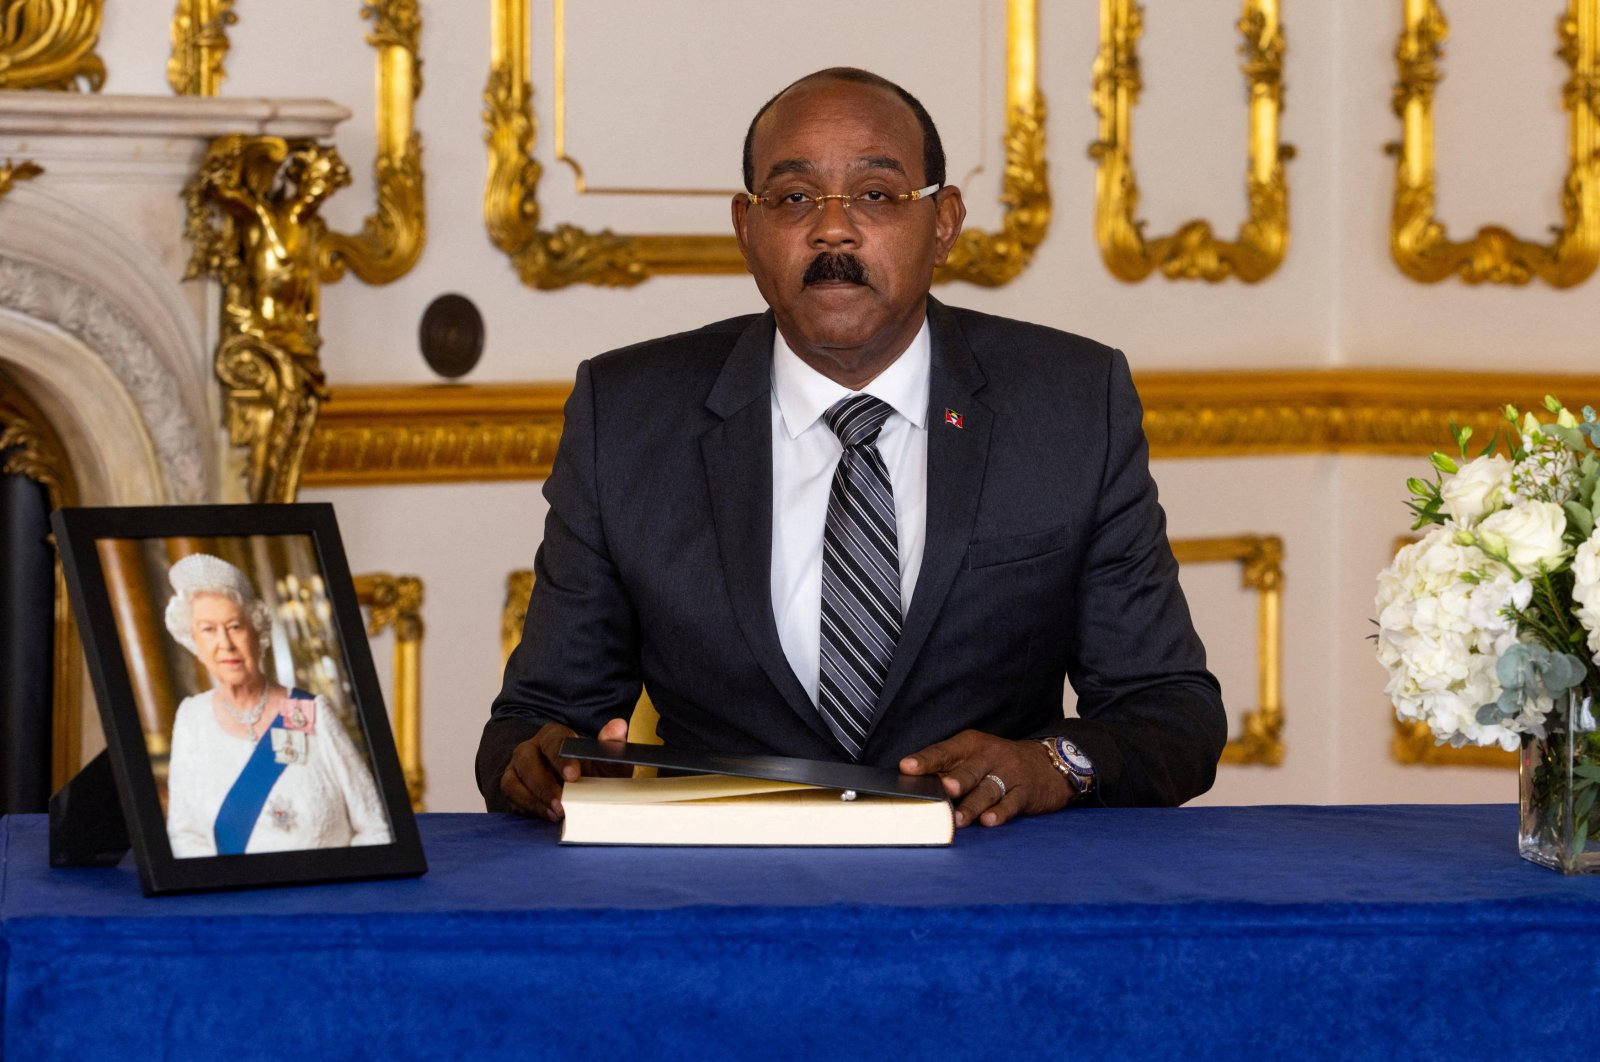 Prime Minister of Antigua and Barbuda, Gaston Browne, signs a book of condolence at Lancaster House in London, U.K., Sept. 17, 2022. (Reuters Photo)